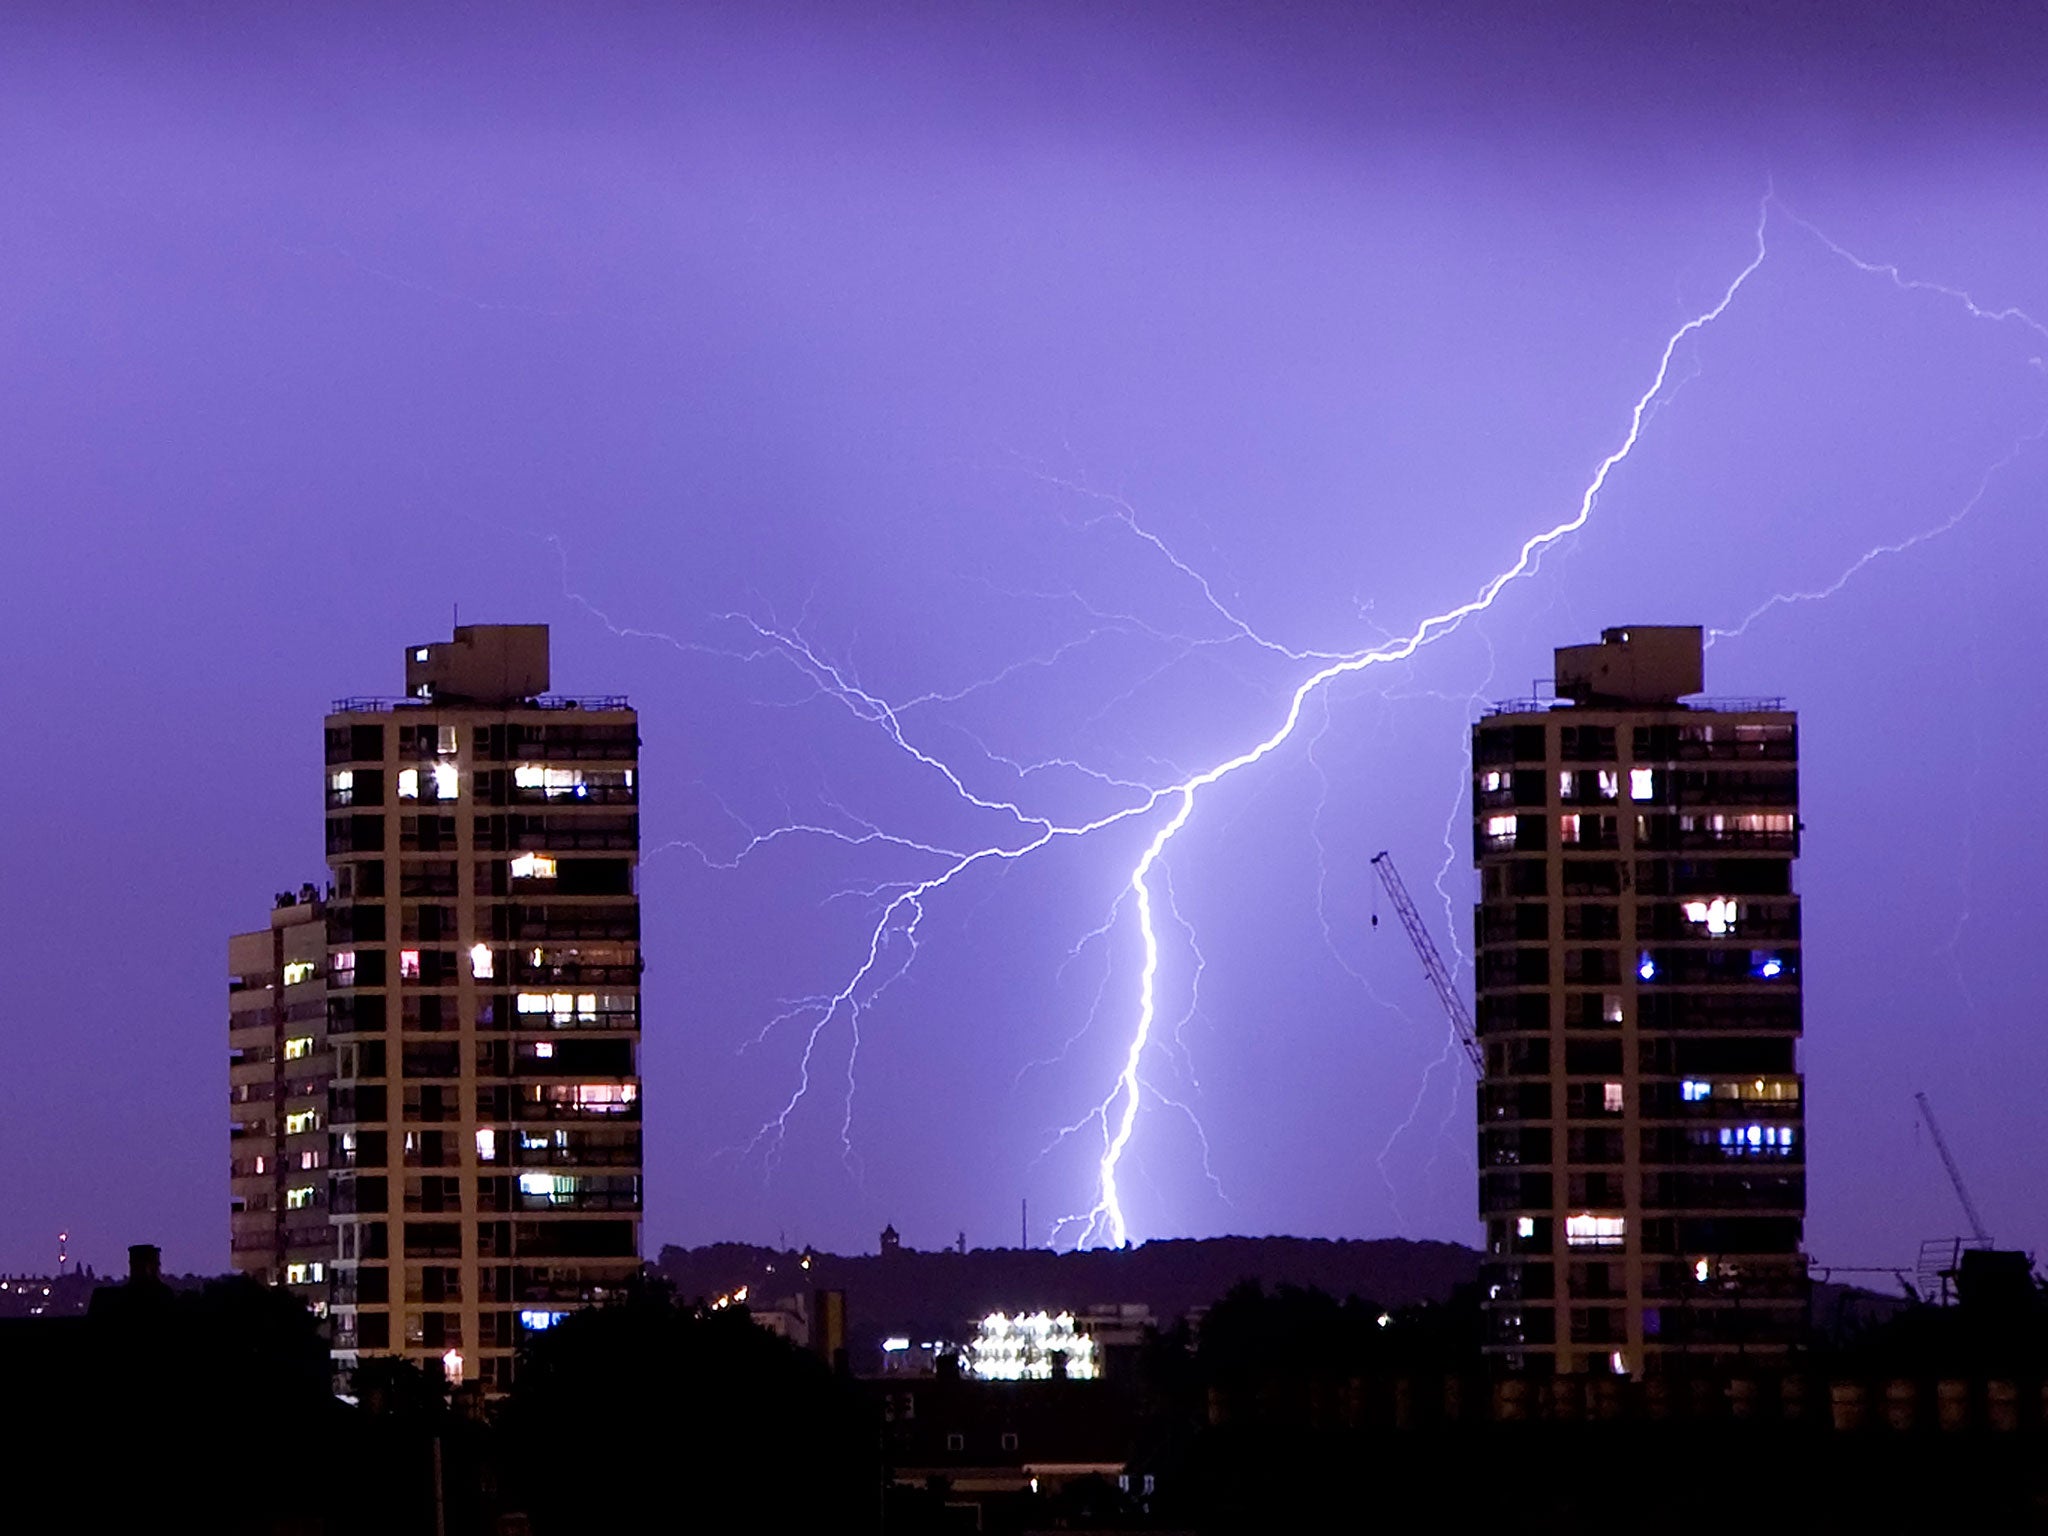 The heatwave was cut short by thunder and lightning